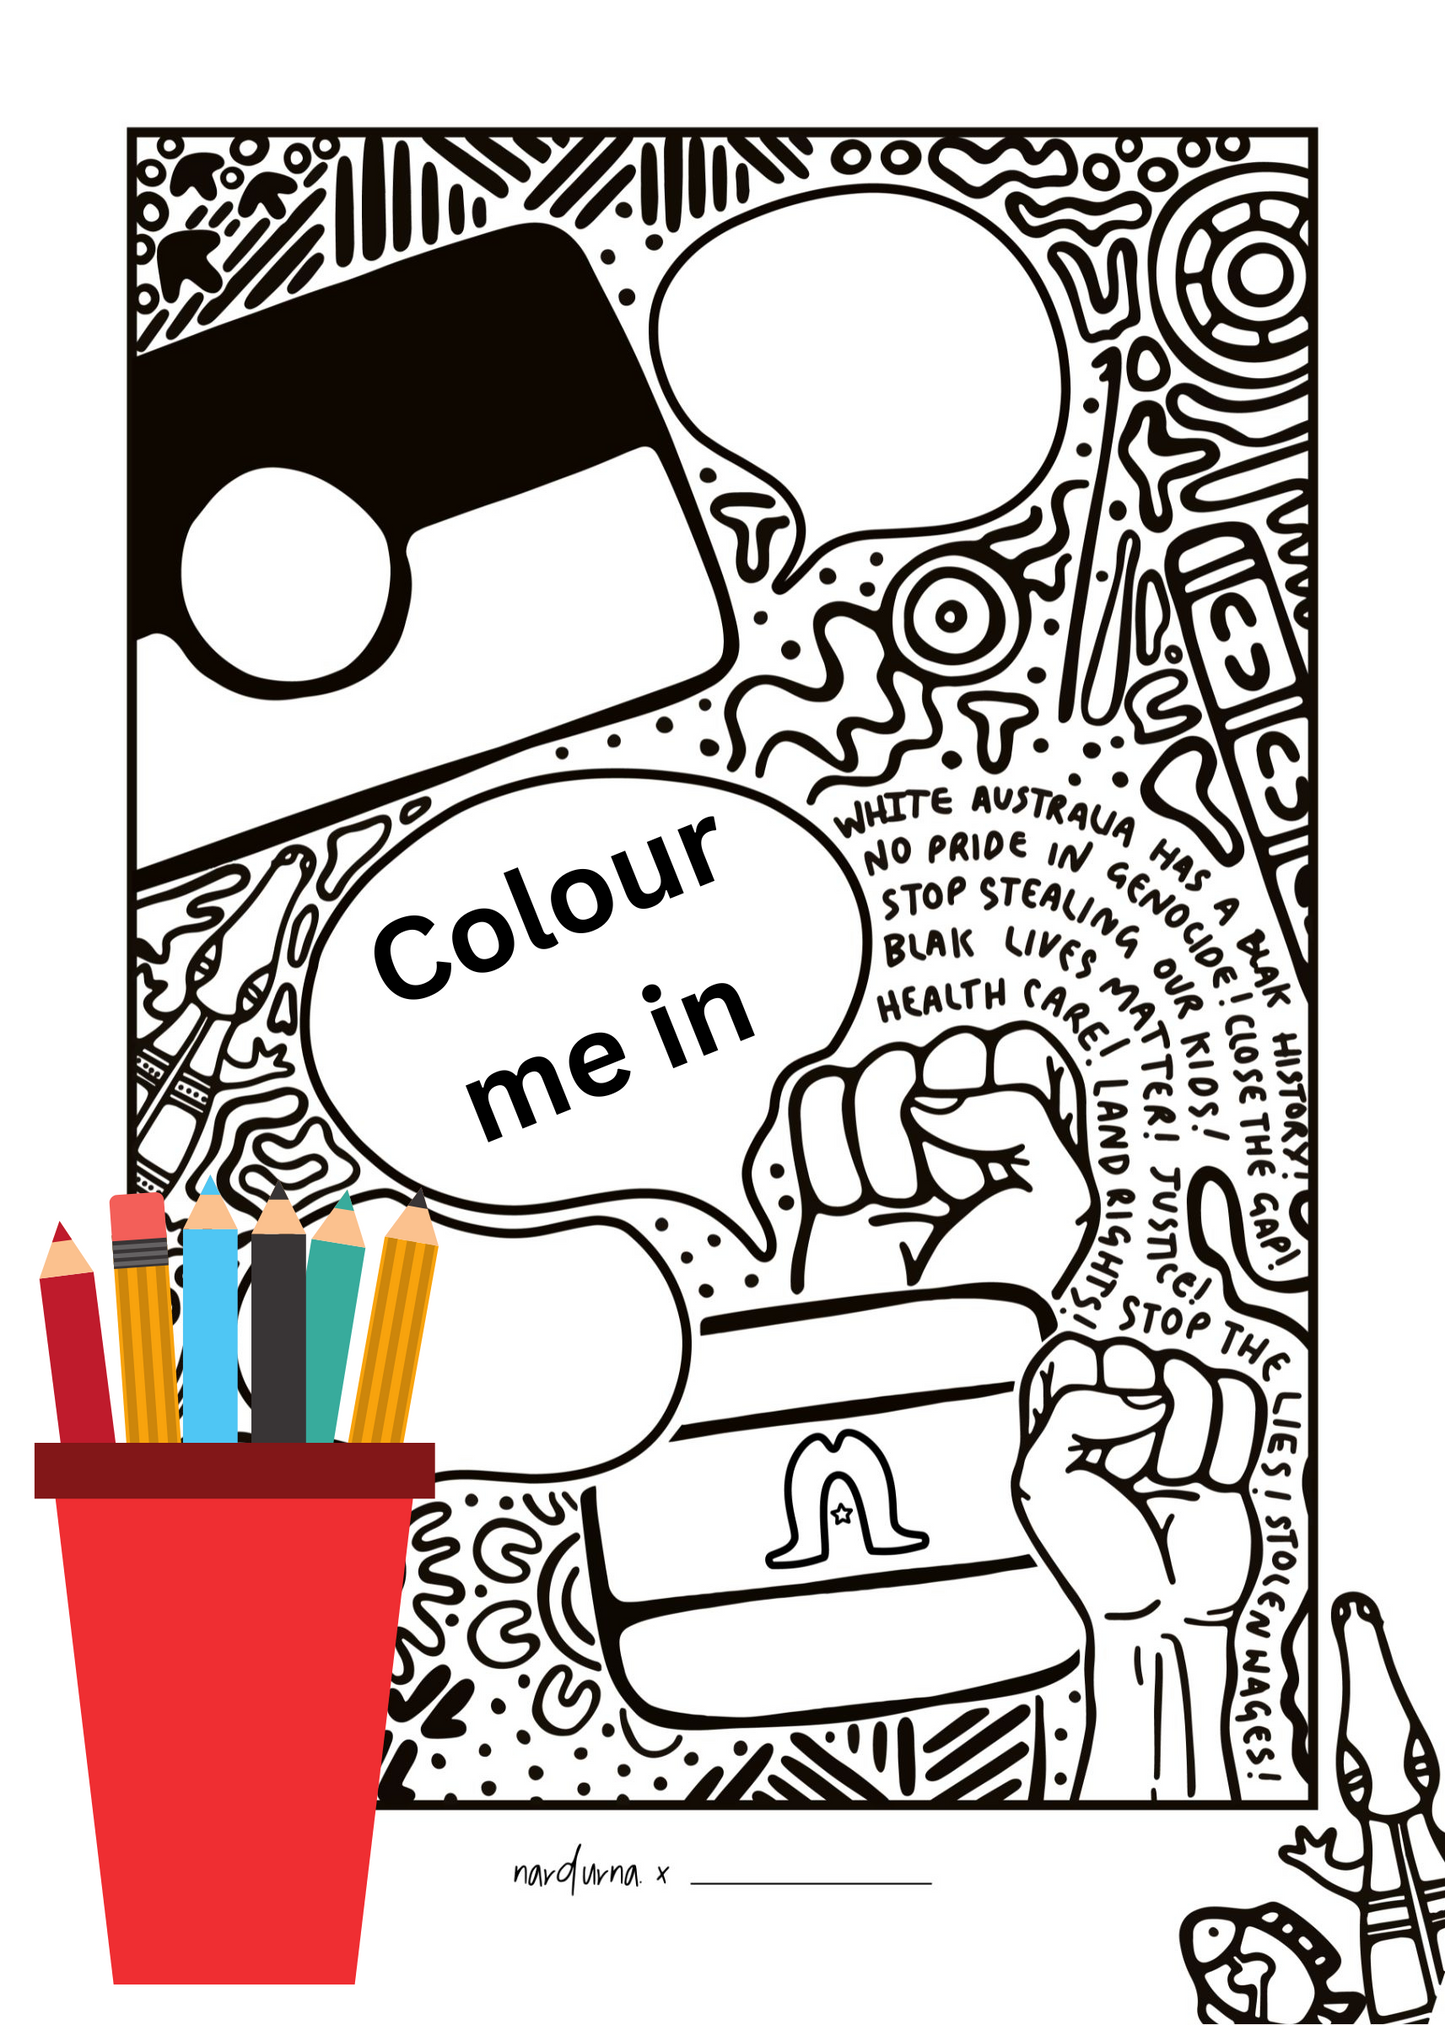 NAIDOC poster colouring in sheet 🖍️ - downloadable file